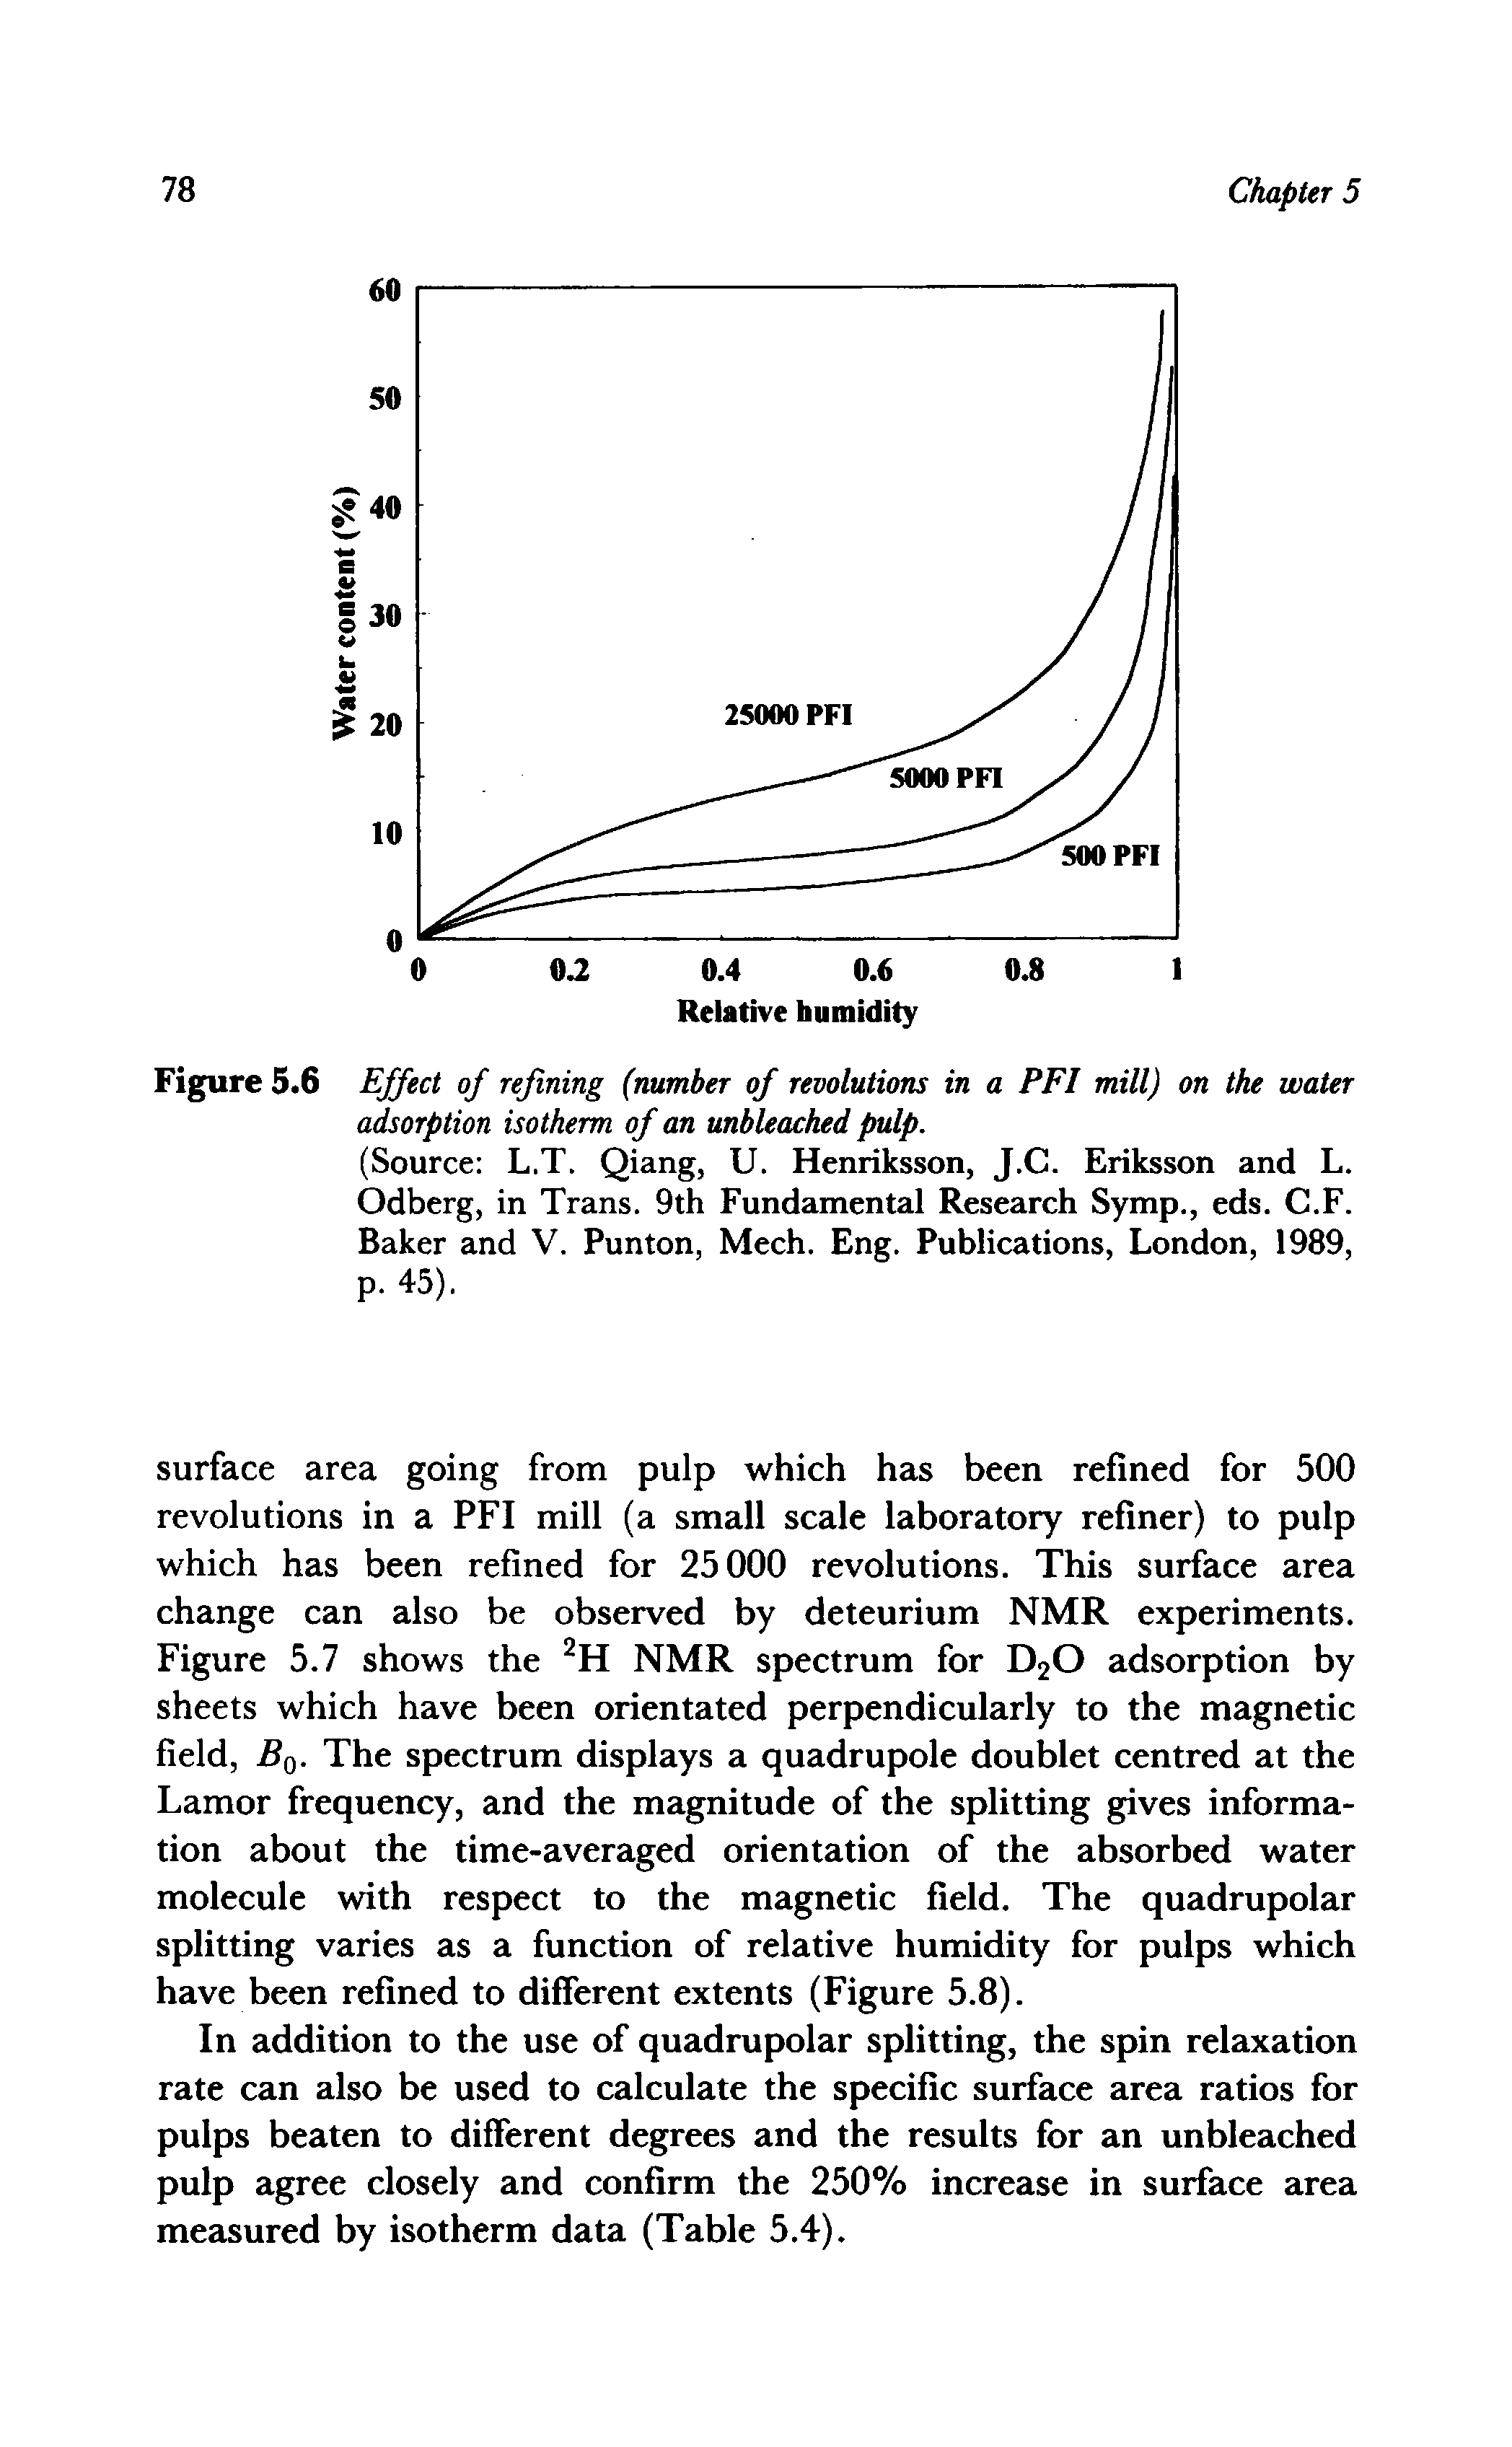 Figure 5.6 Effect of refining (number of revolutions in a PFI mill) on the water adsorption isotherm of an unbleached pulp.